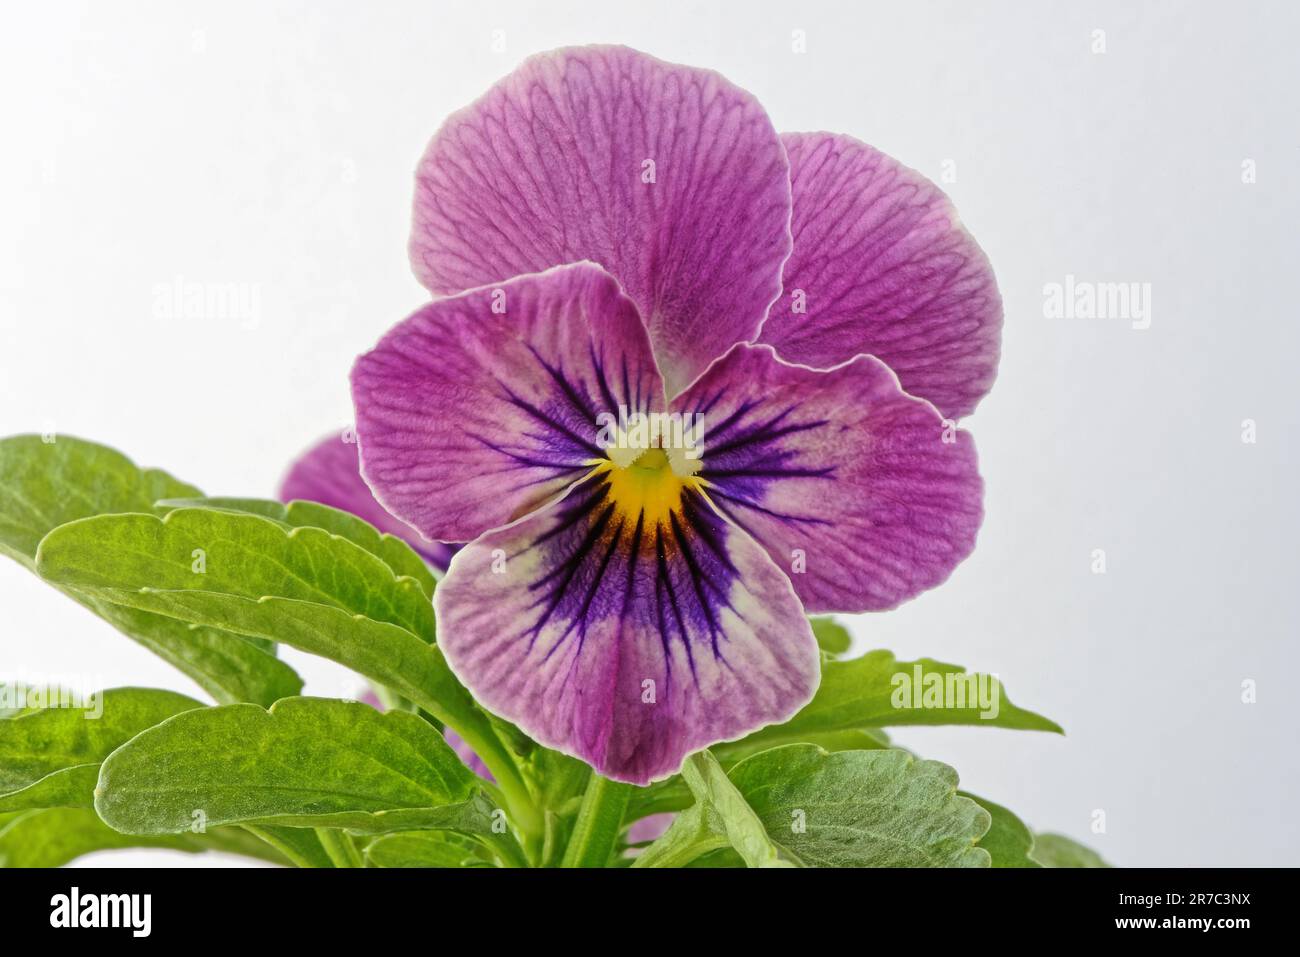 Close up of a Viola, or Pansy,flower. Viola Tricolor Hortensis. Stock Photo